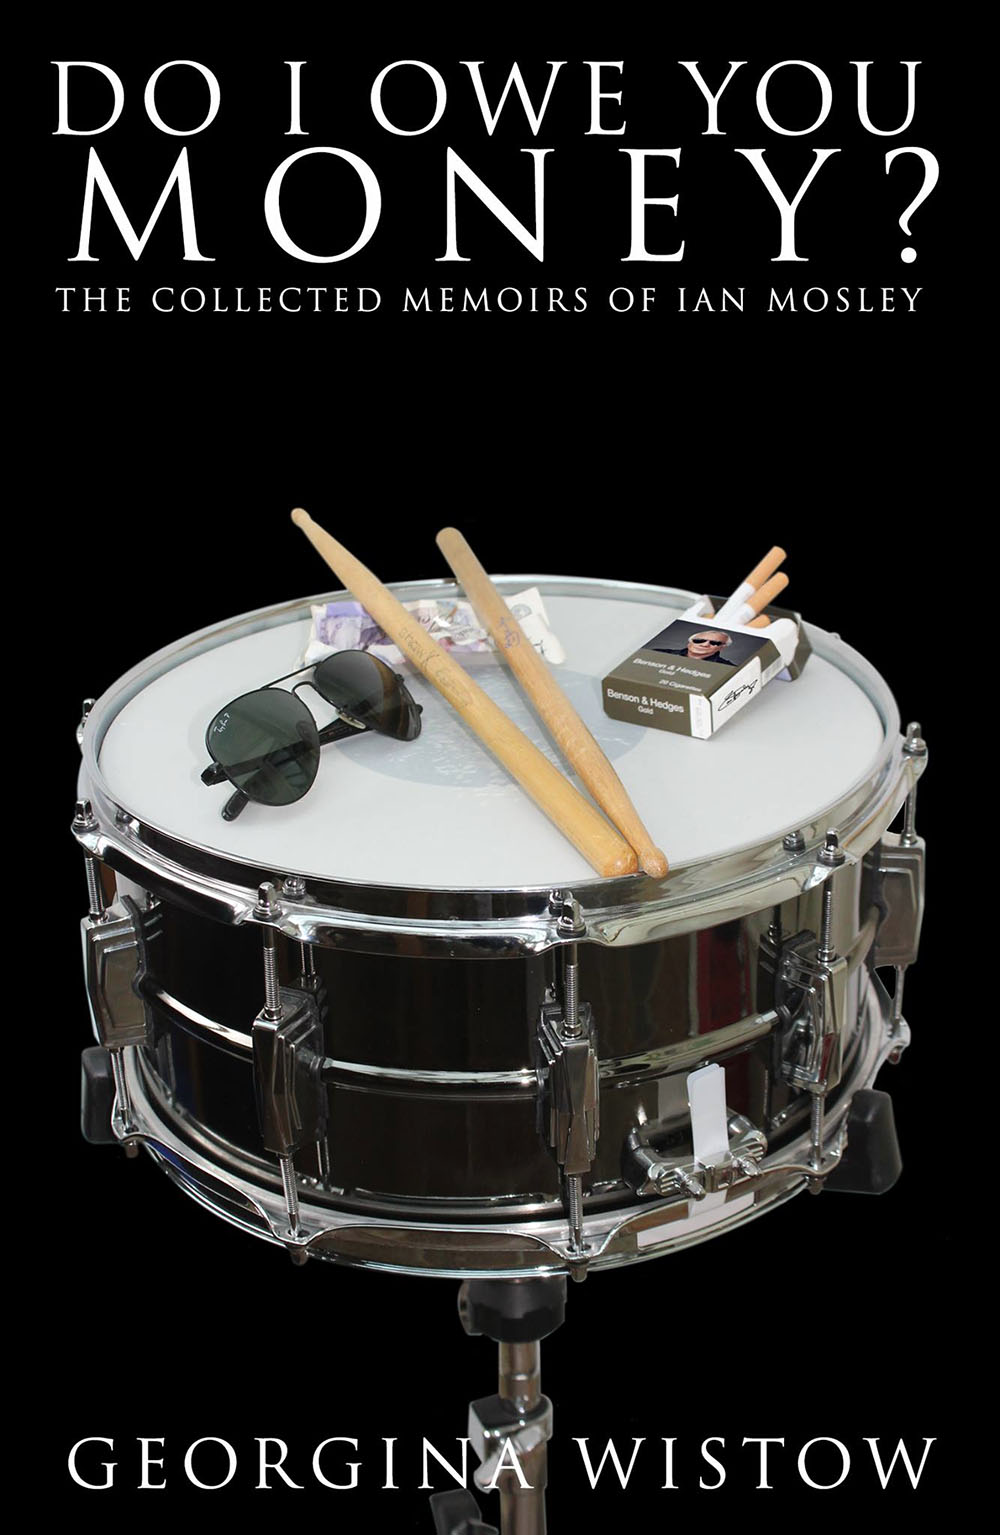 Do I Owe You Money? - The Collected Memoirs of Ian Mosley